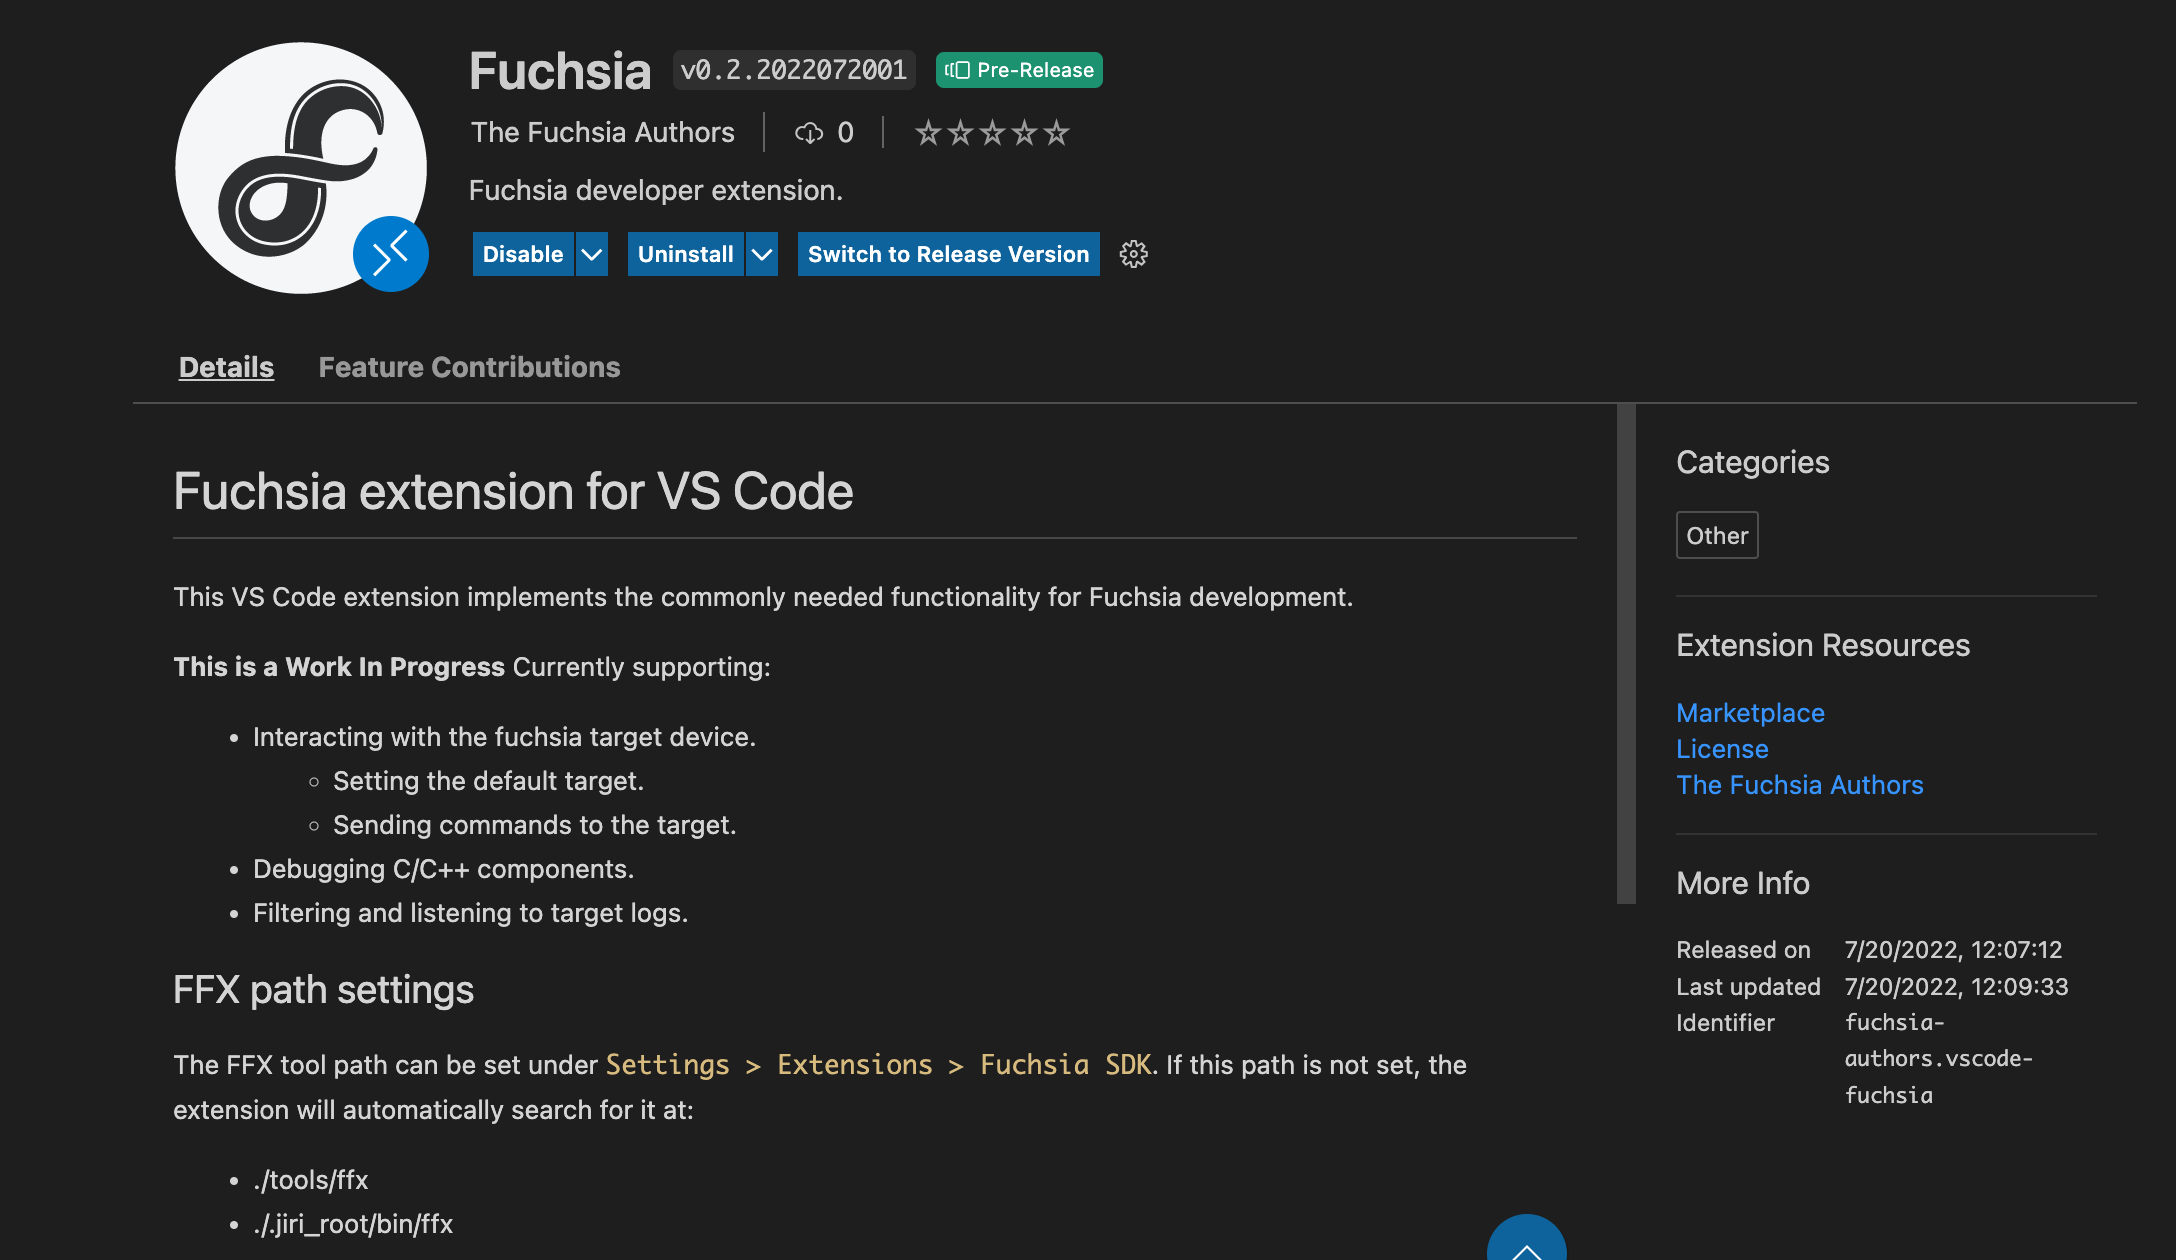 This figure shows the image of the fuchsia developer extension in the Visual Studio Code marketplace